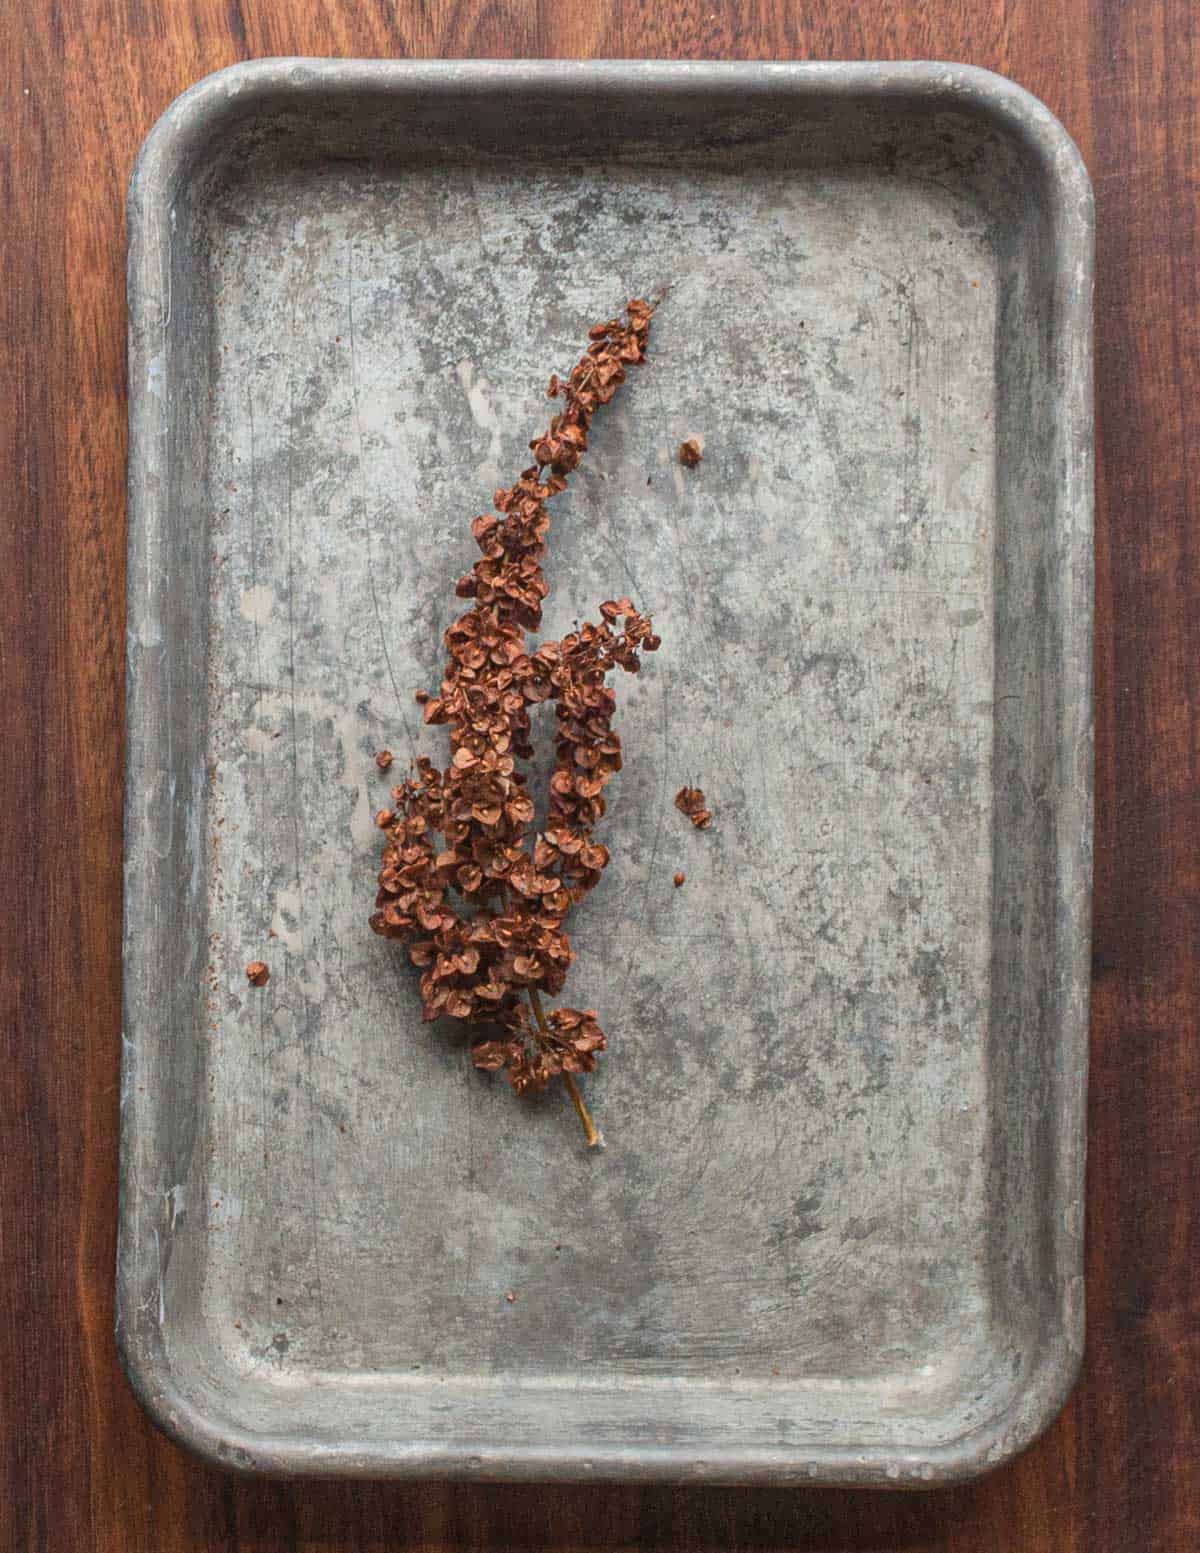 A curly dock seed head on a tray. 